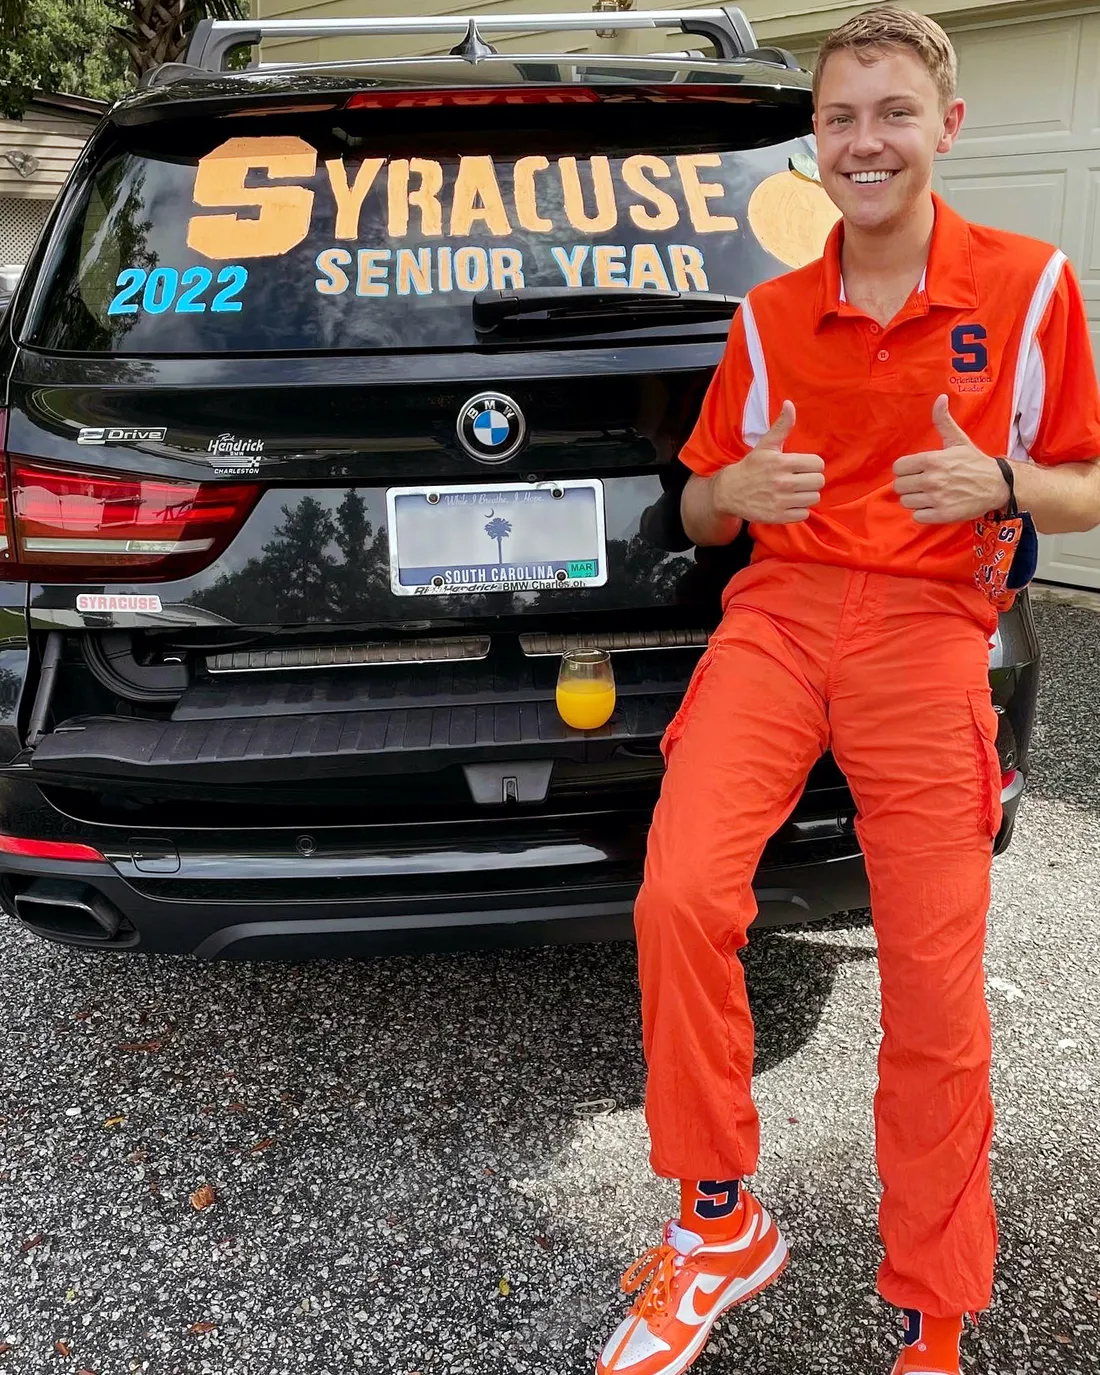 Daniel Wood poses in front of his car before leaving for his senior year at Syracuse